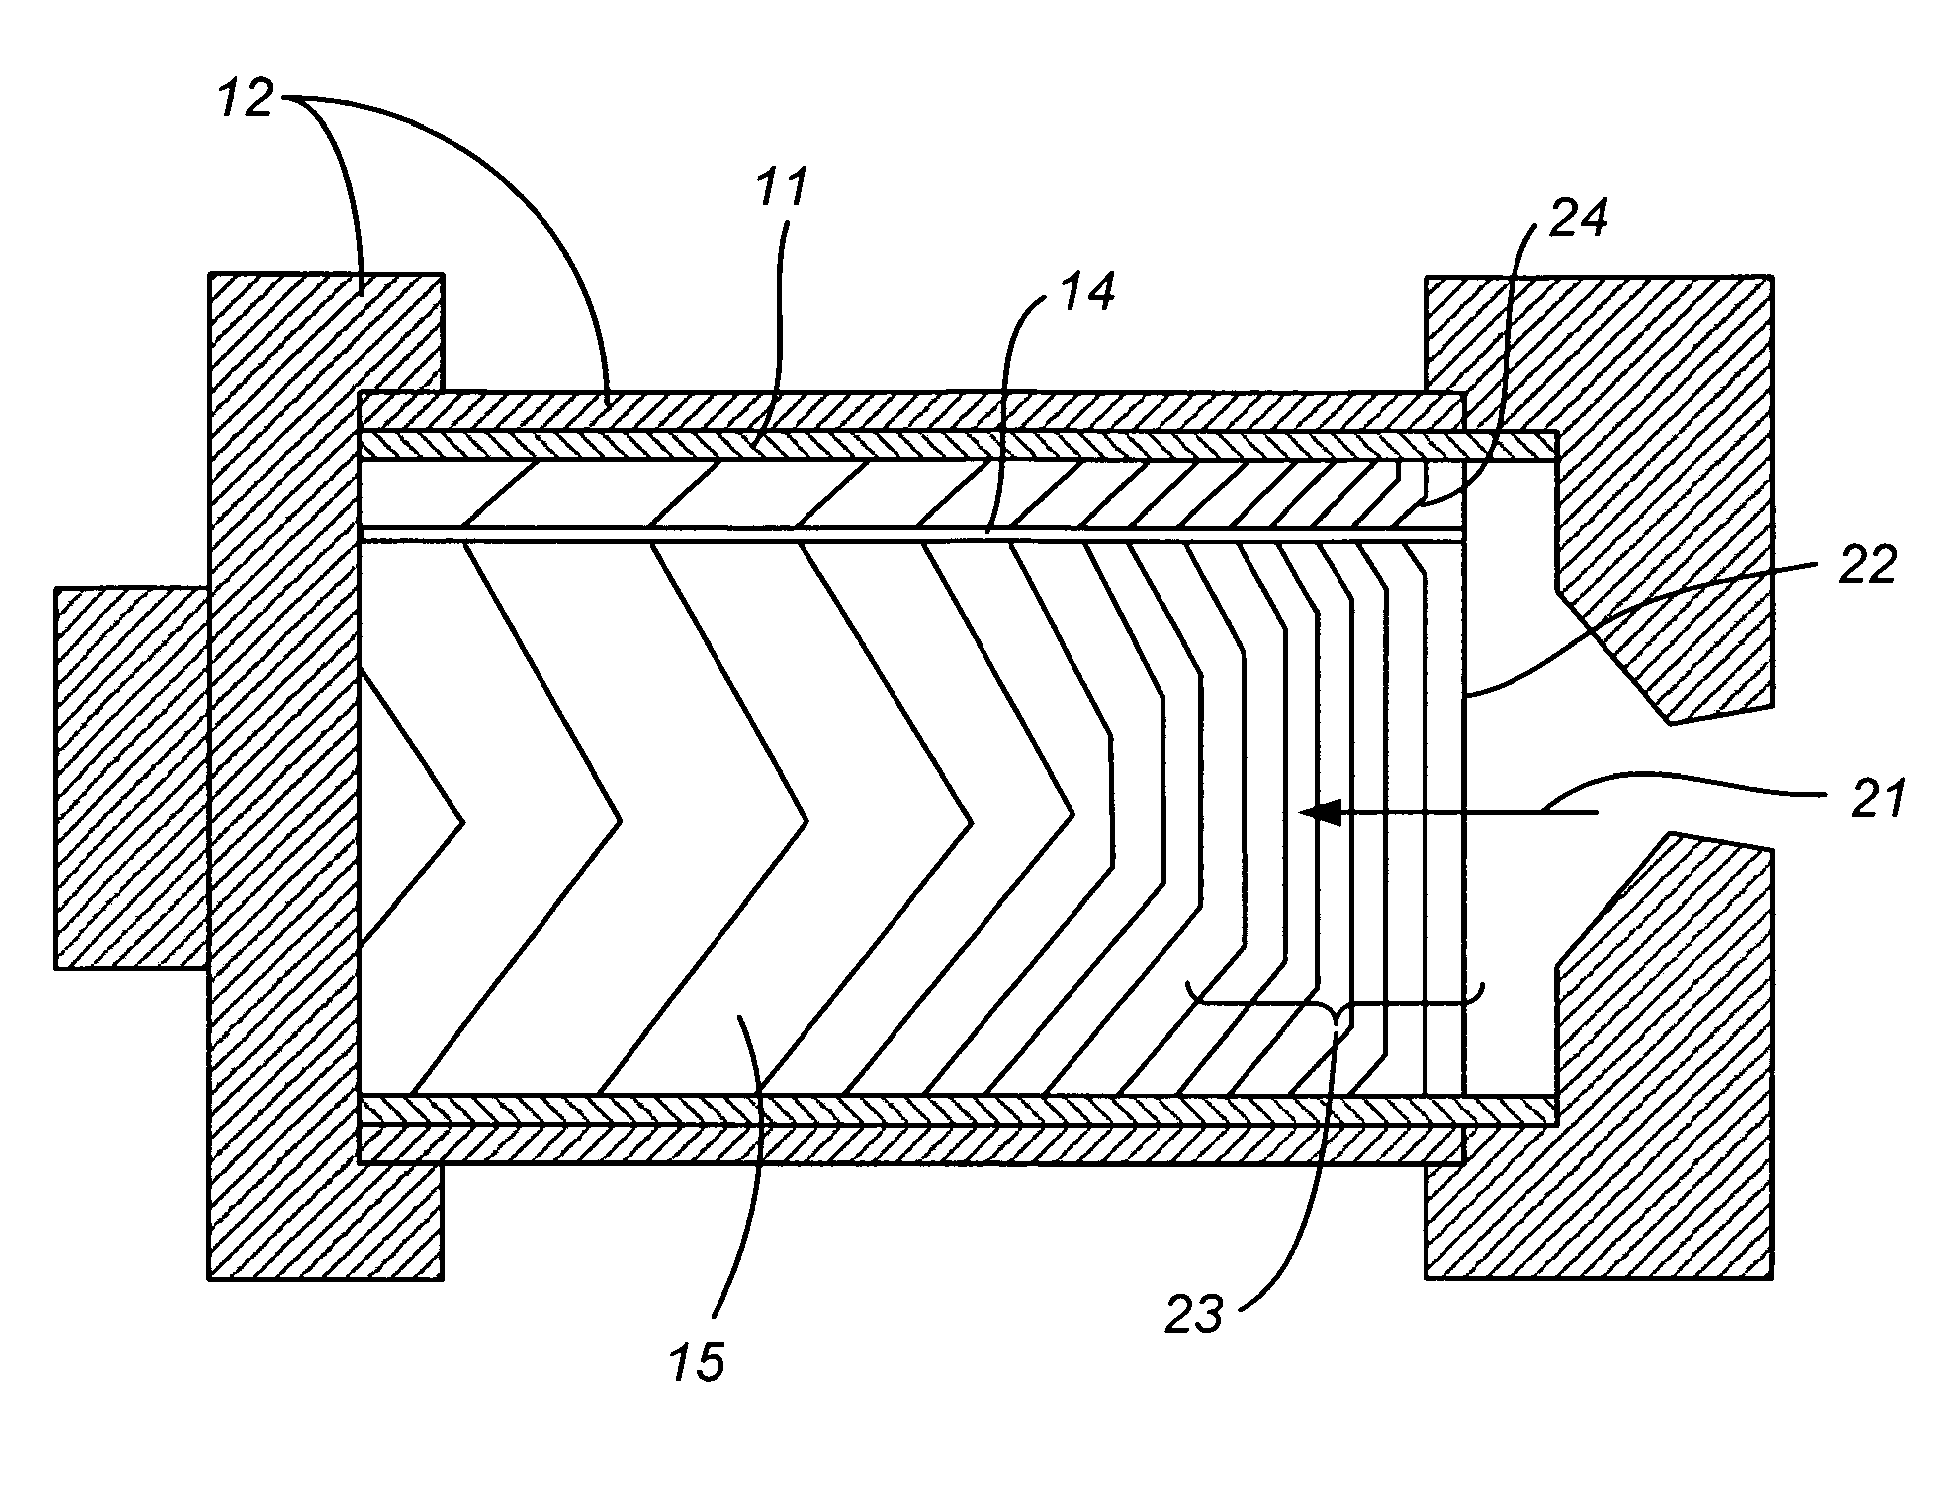 End-burning propellant grain with area-enhanced burning surface